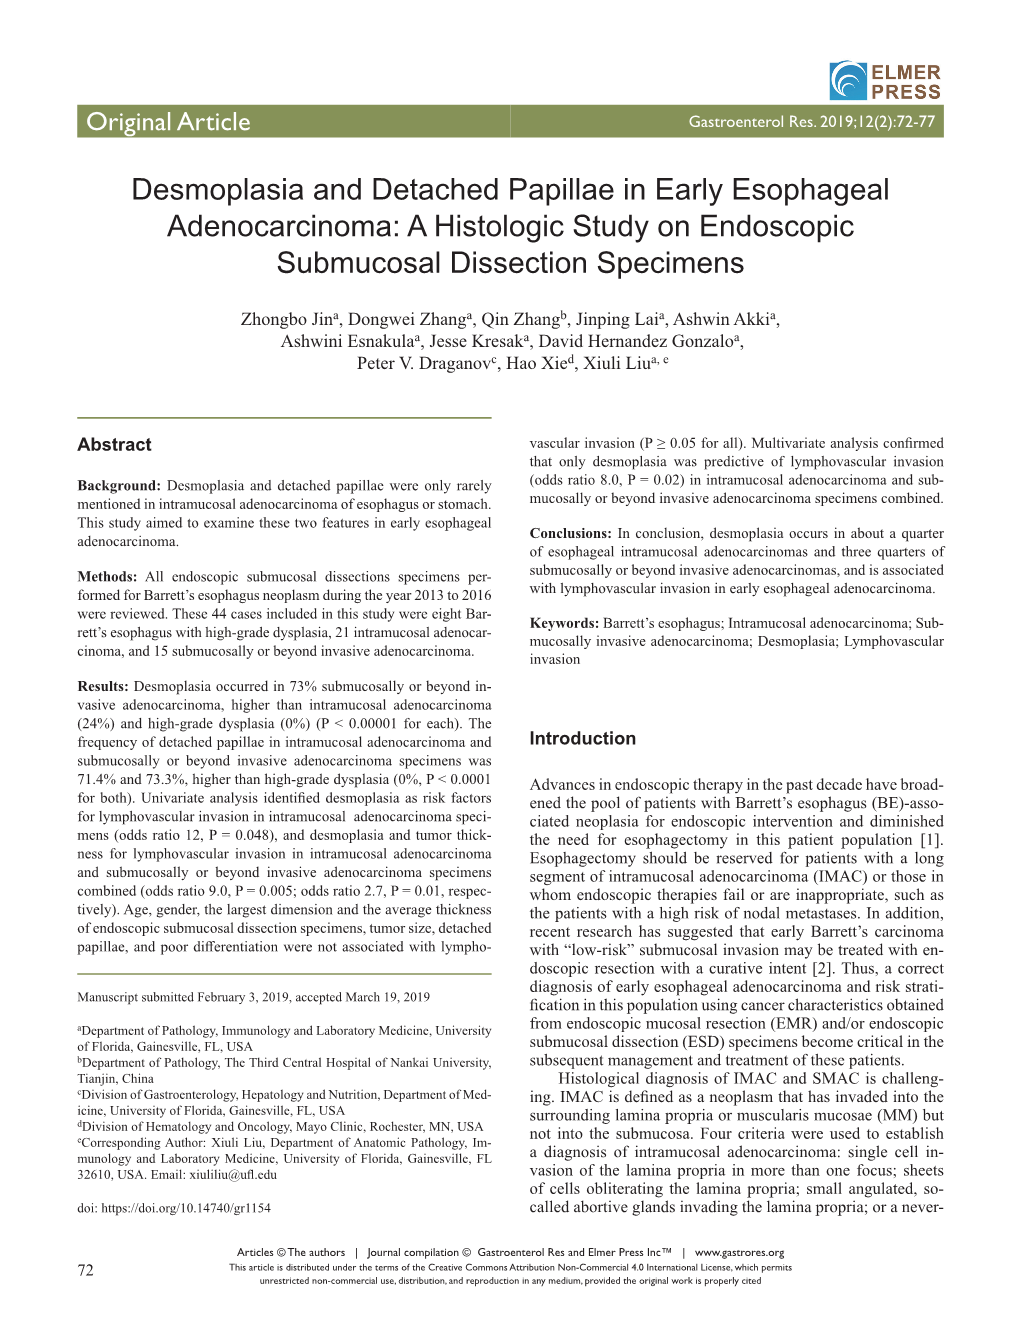 Desmoplasia and Detached Papillae in Early Esophageal Adenocarcinoma: a Histologic Study on Endoscopic Submucosal Dissection Specimens